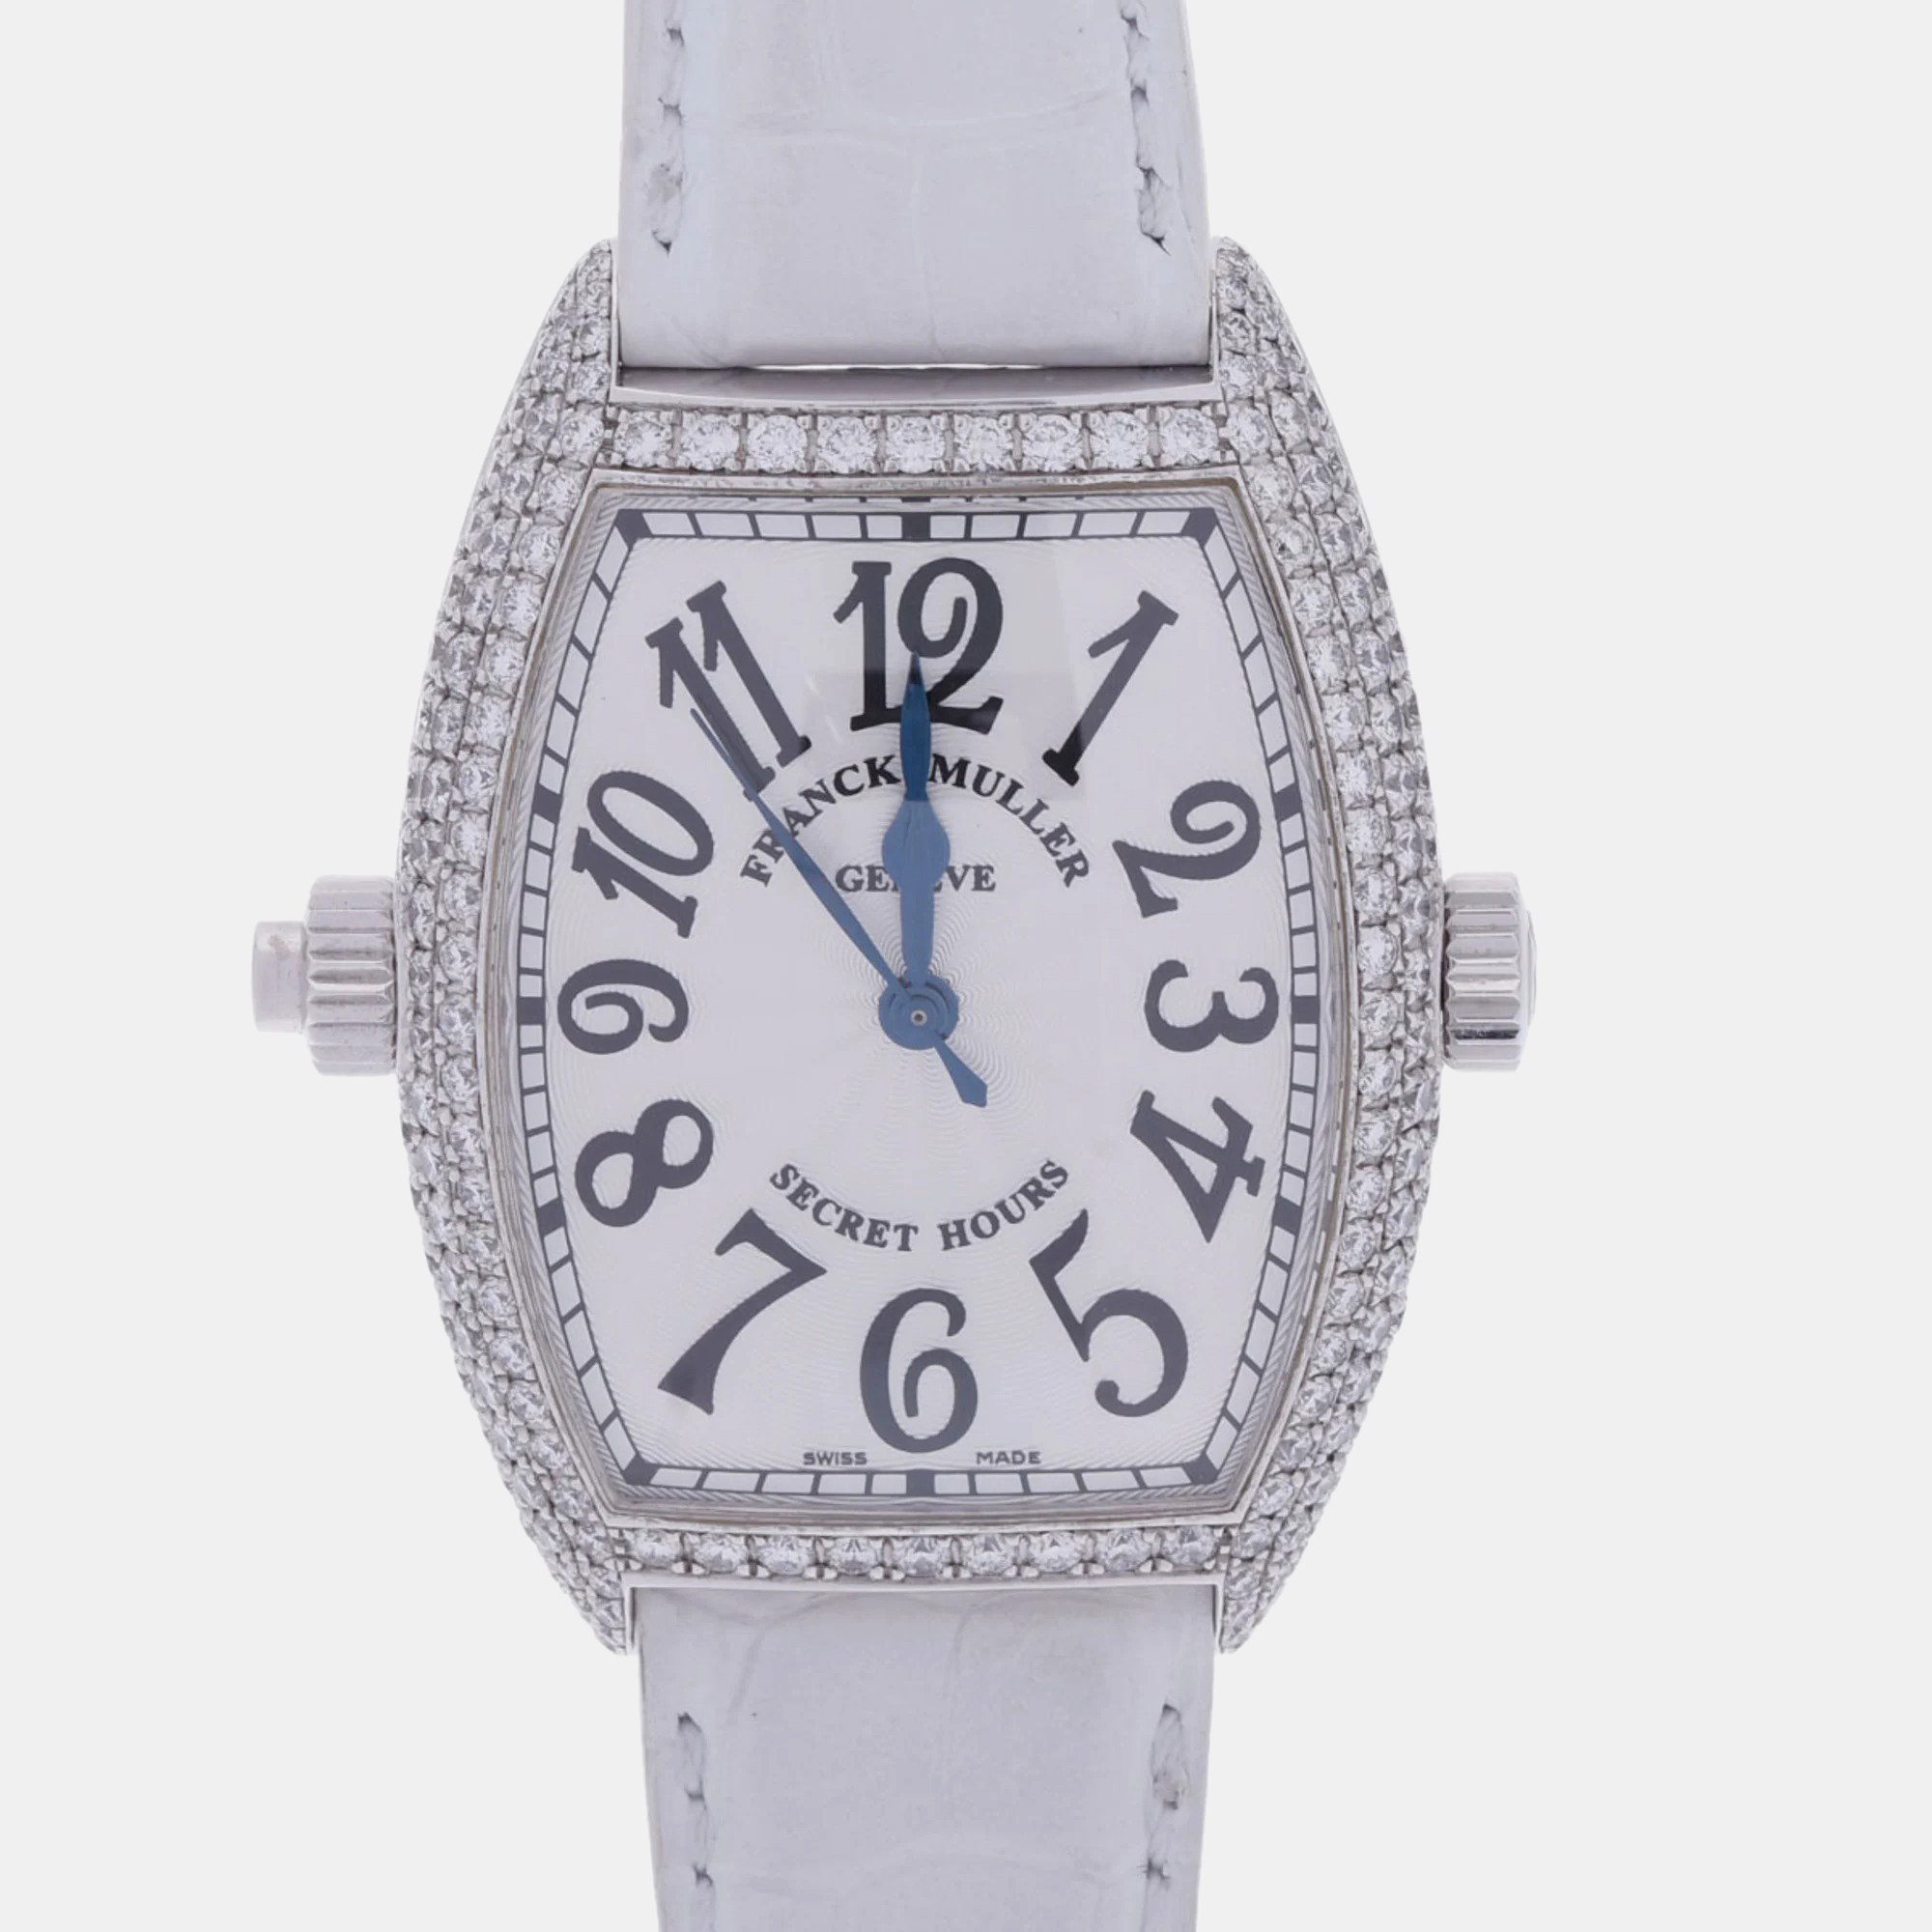 Franck muller white 18k white gold secret hours 7880sehid automatic men's wristwatch 32 mm